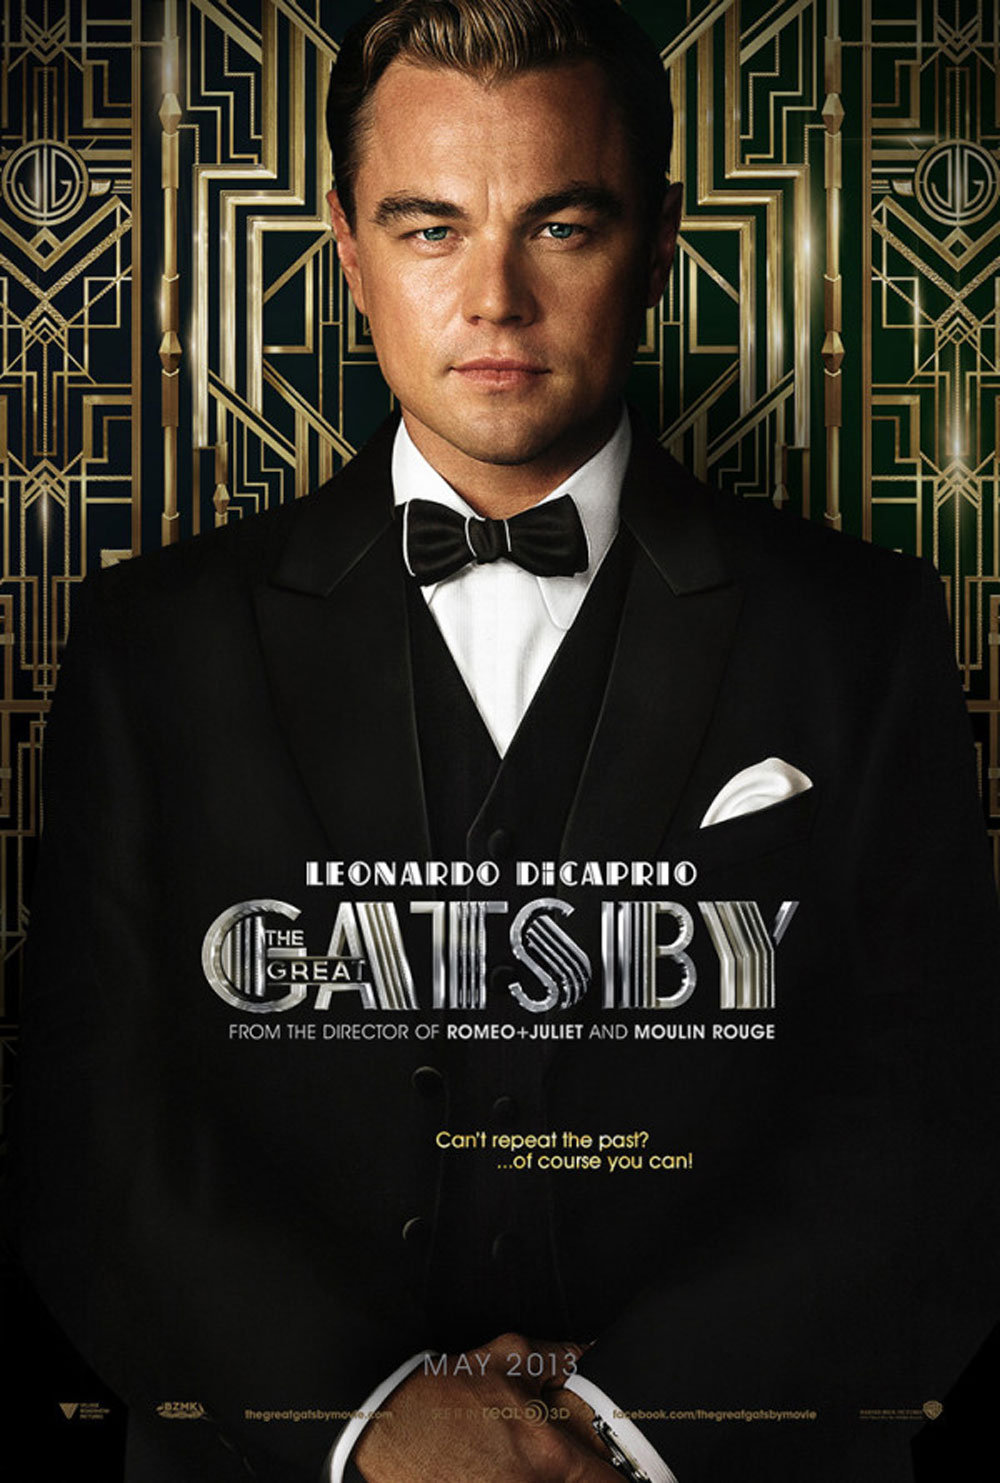 Serenity Now: The Great Gatsby